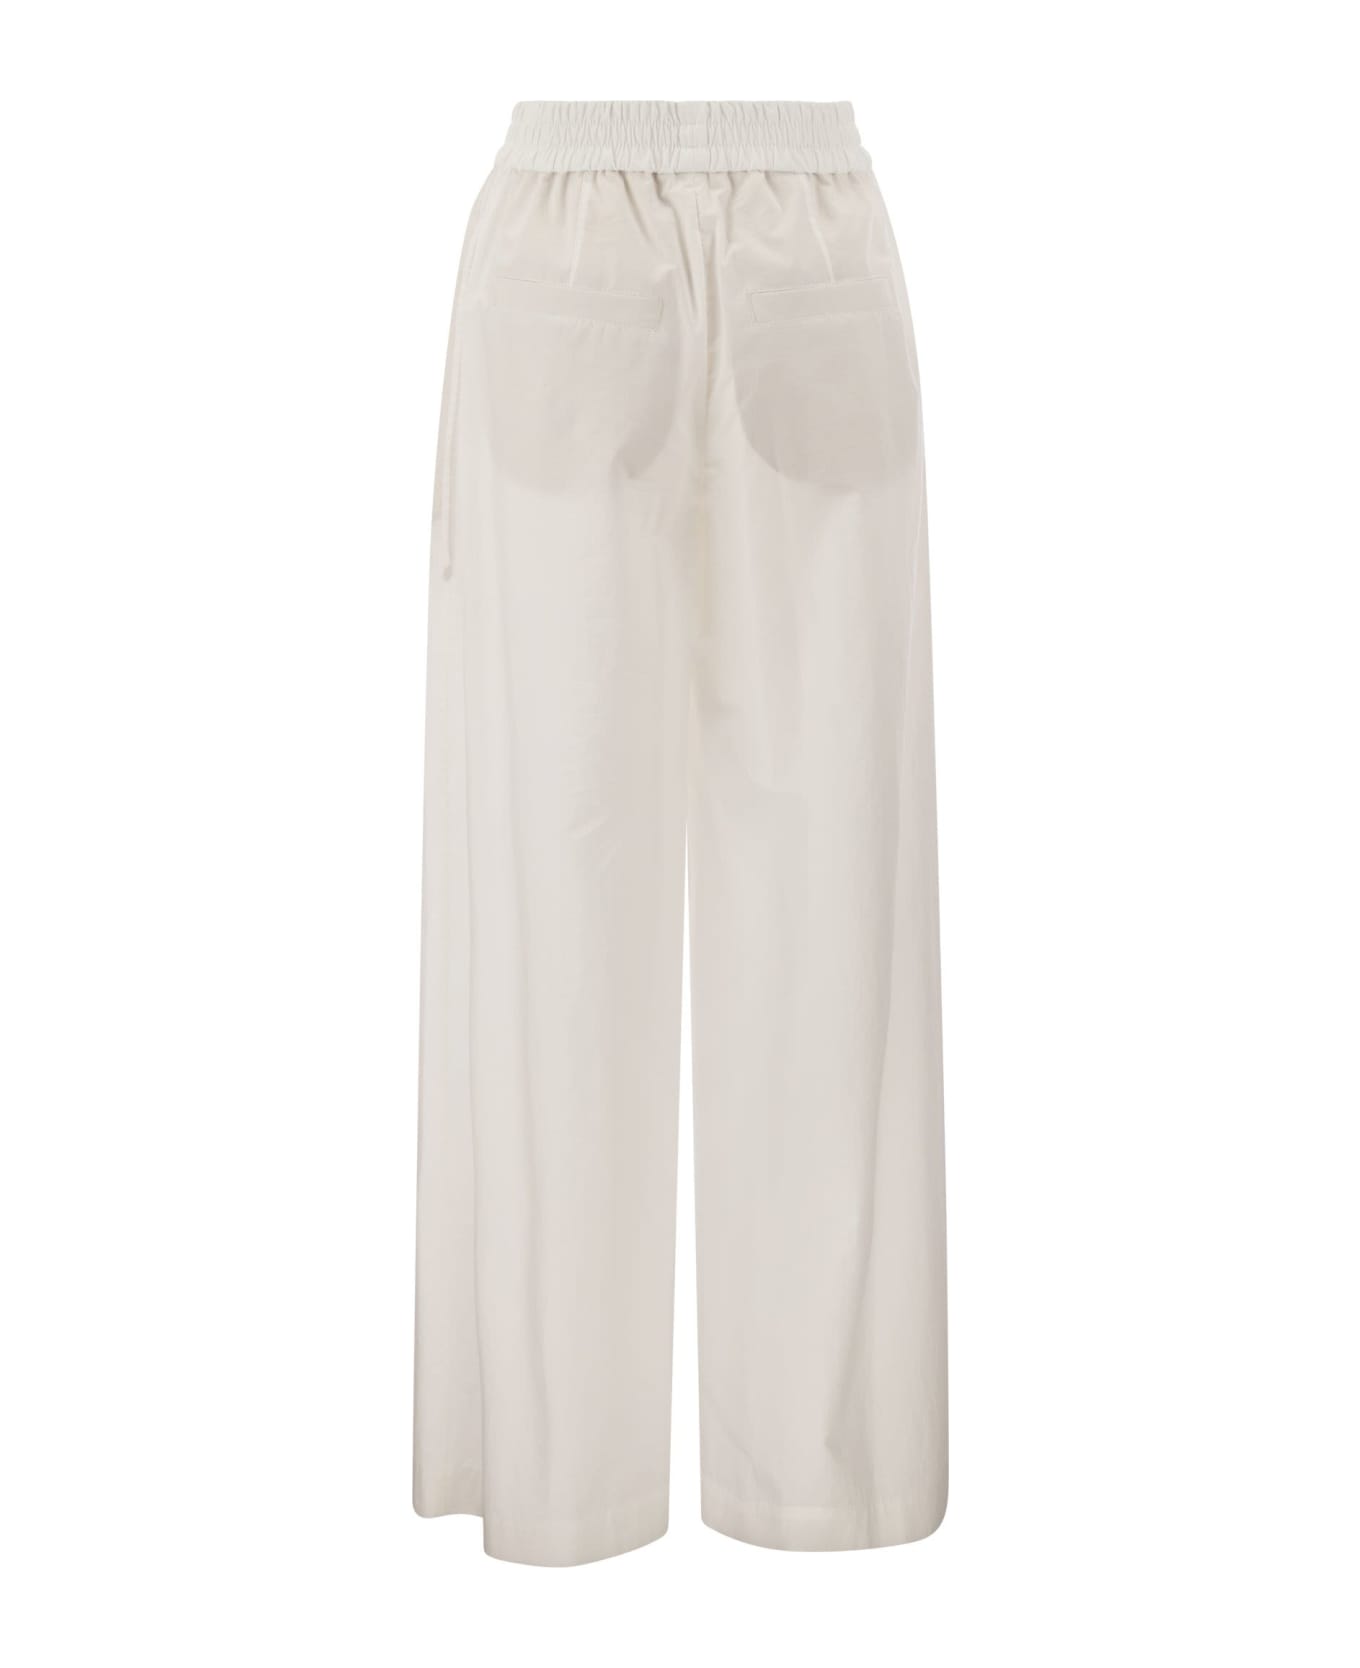 Brunello Cucinelli Relaxed Light Cotton Trousers - White